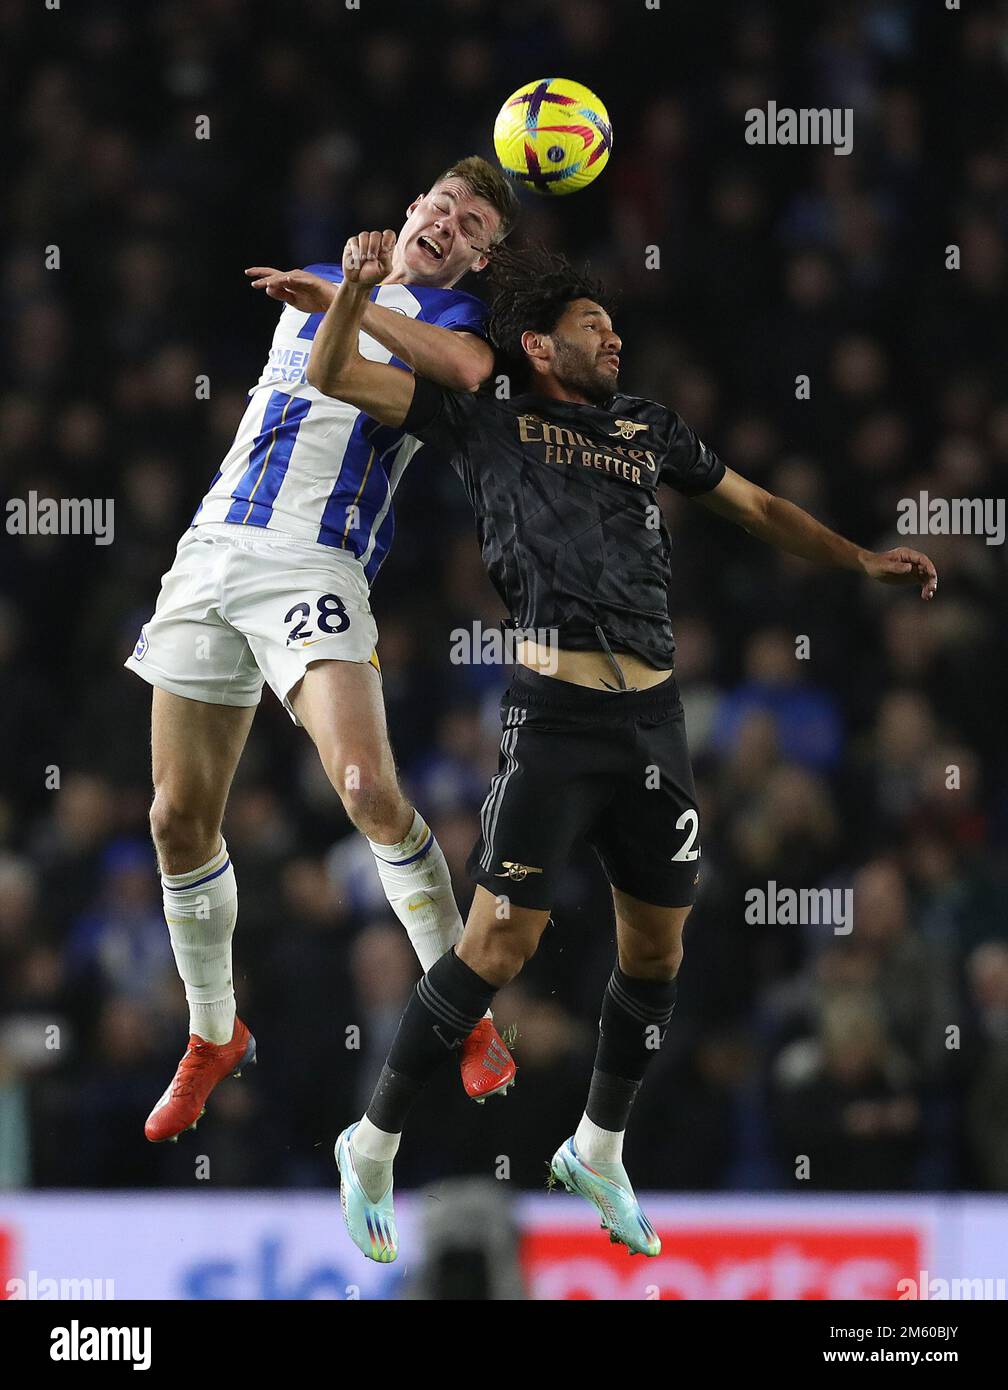 Brighton and Hove, UK. 31st Dec, 2022. Evan Ferguson of Brighton and Hove Albion and Reiss Nelson of Arsenal challenge for the ball during the Premier League match at the AMEX Stadium, Brighton and Hove. Picture credit should read: Paul Terry/Sportimage Credit: Sportimage/Alamy Live News Stock Photo